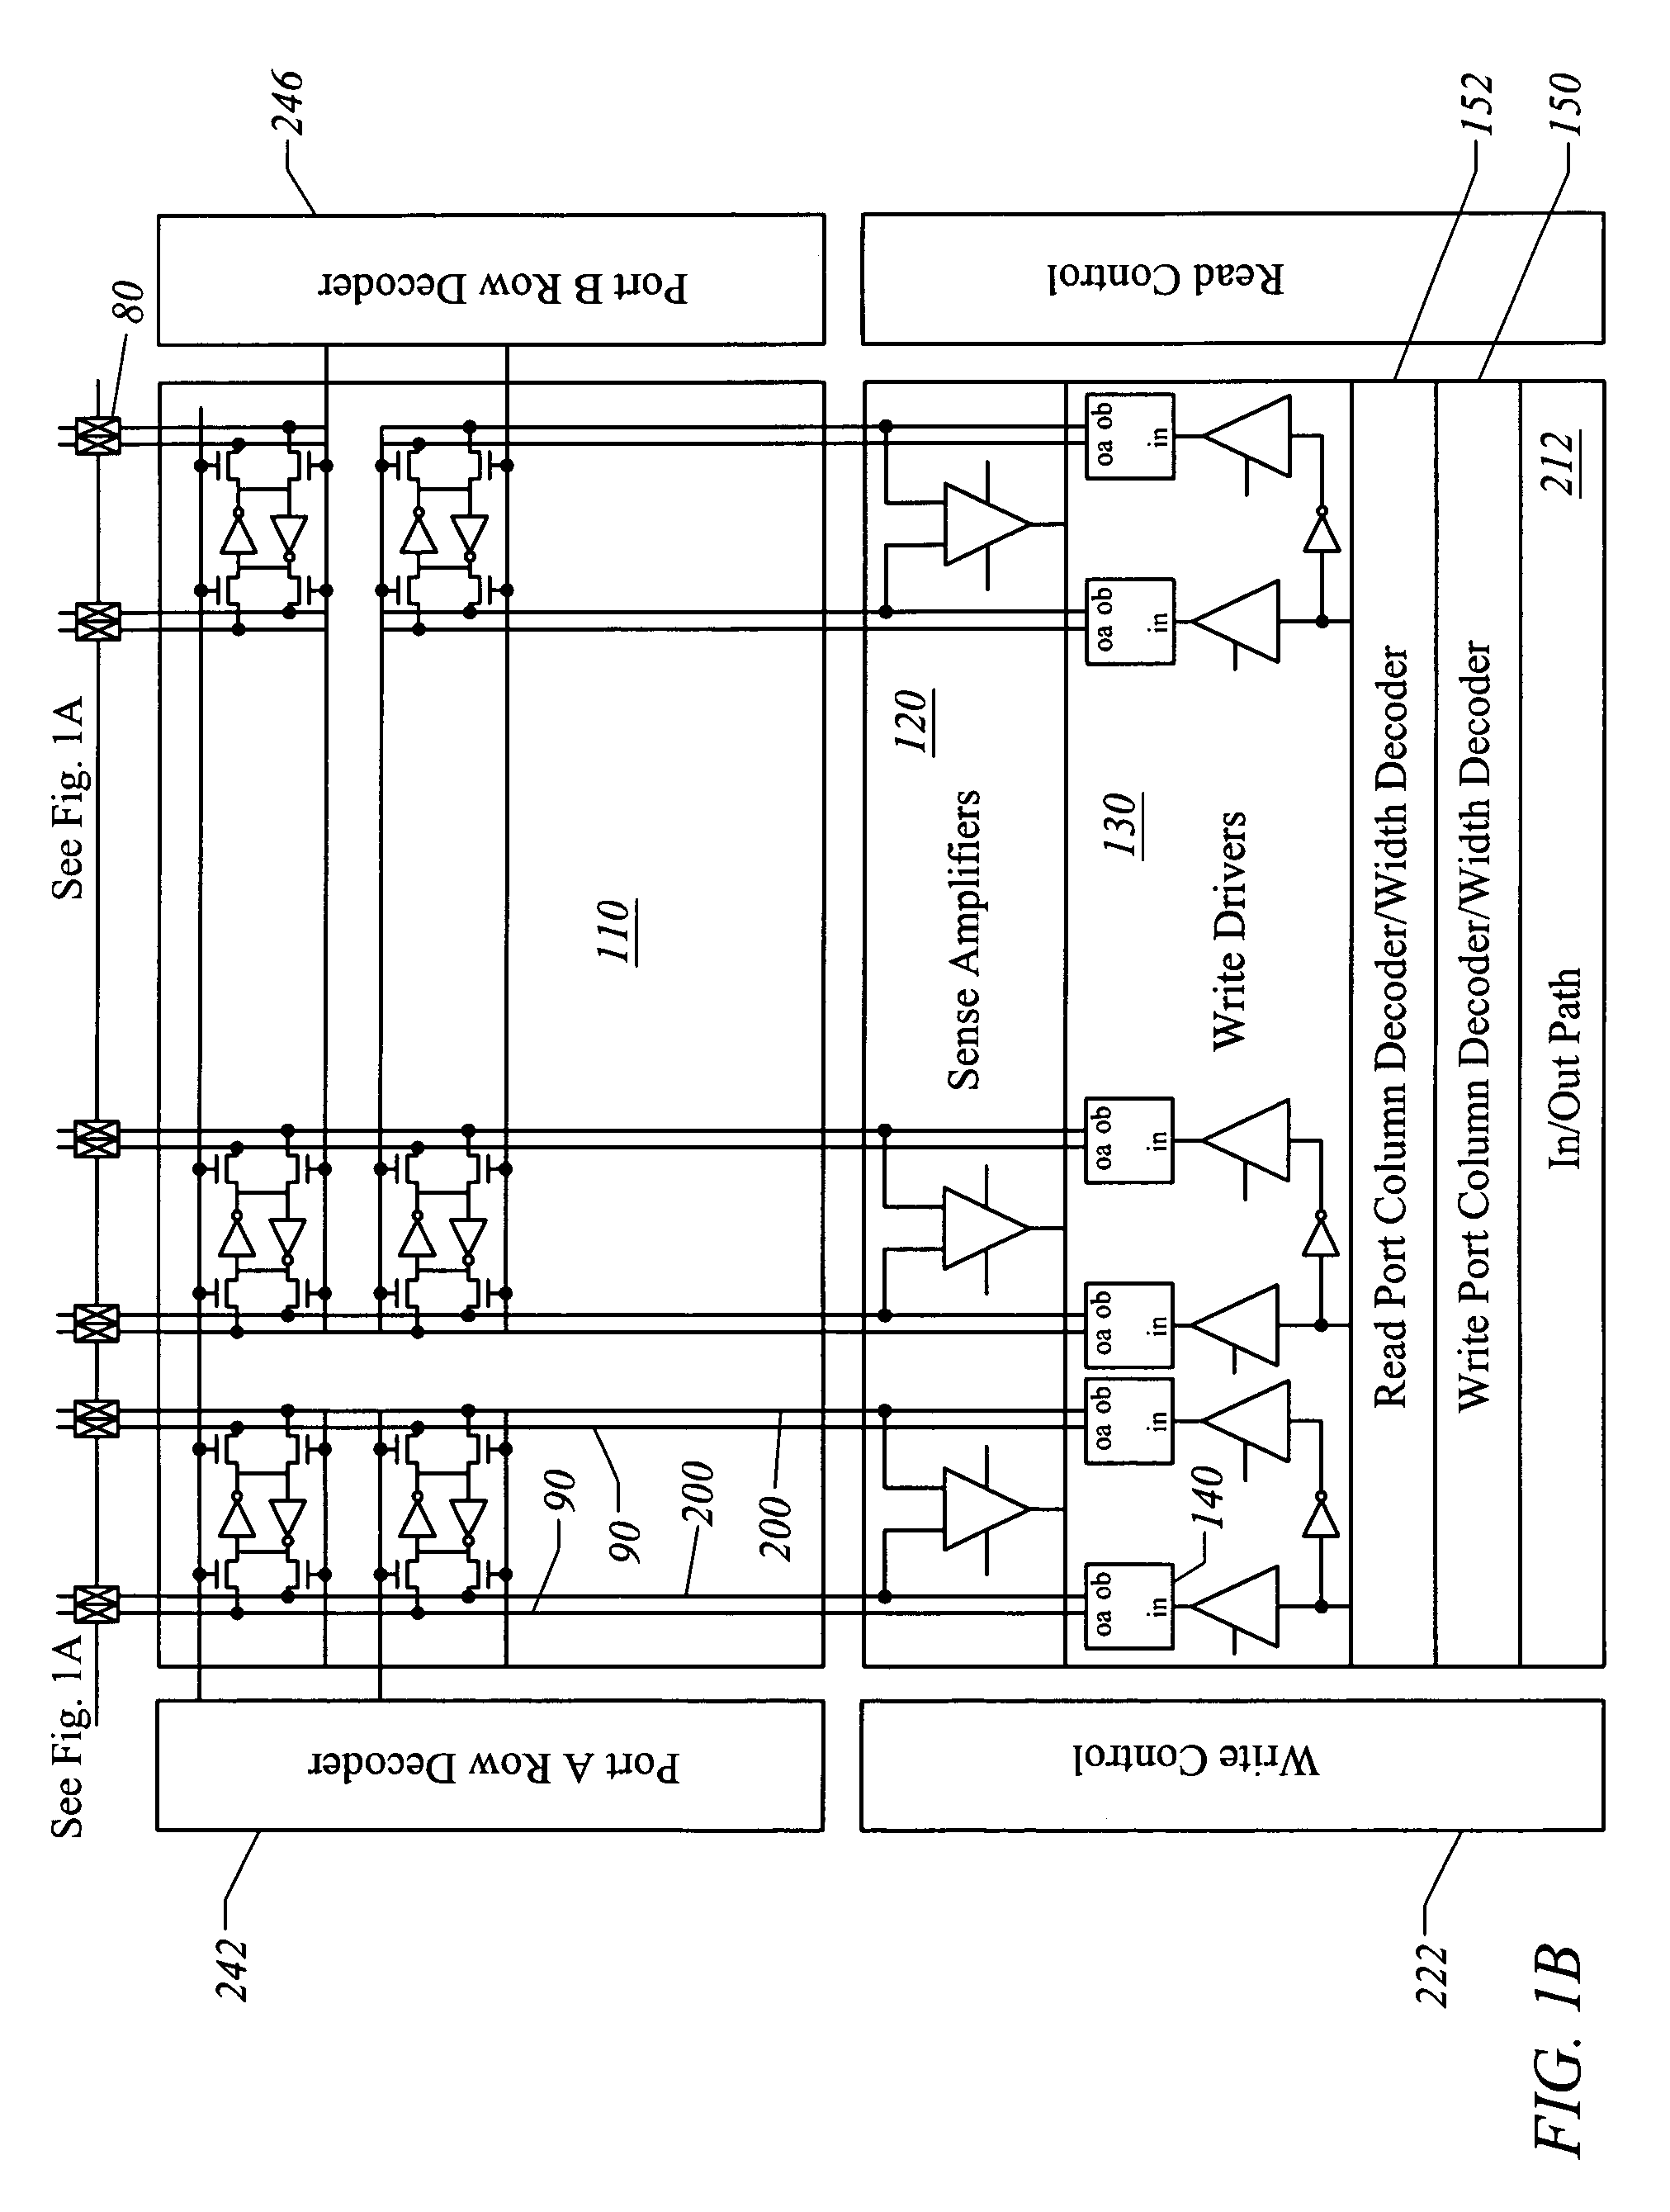 Divisible true dual port memory system supporting simple dual port memory subsystems